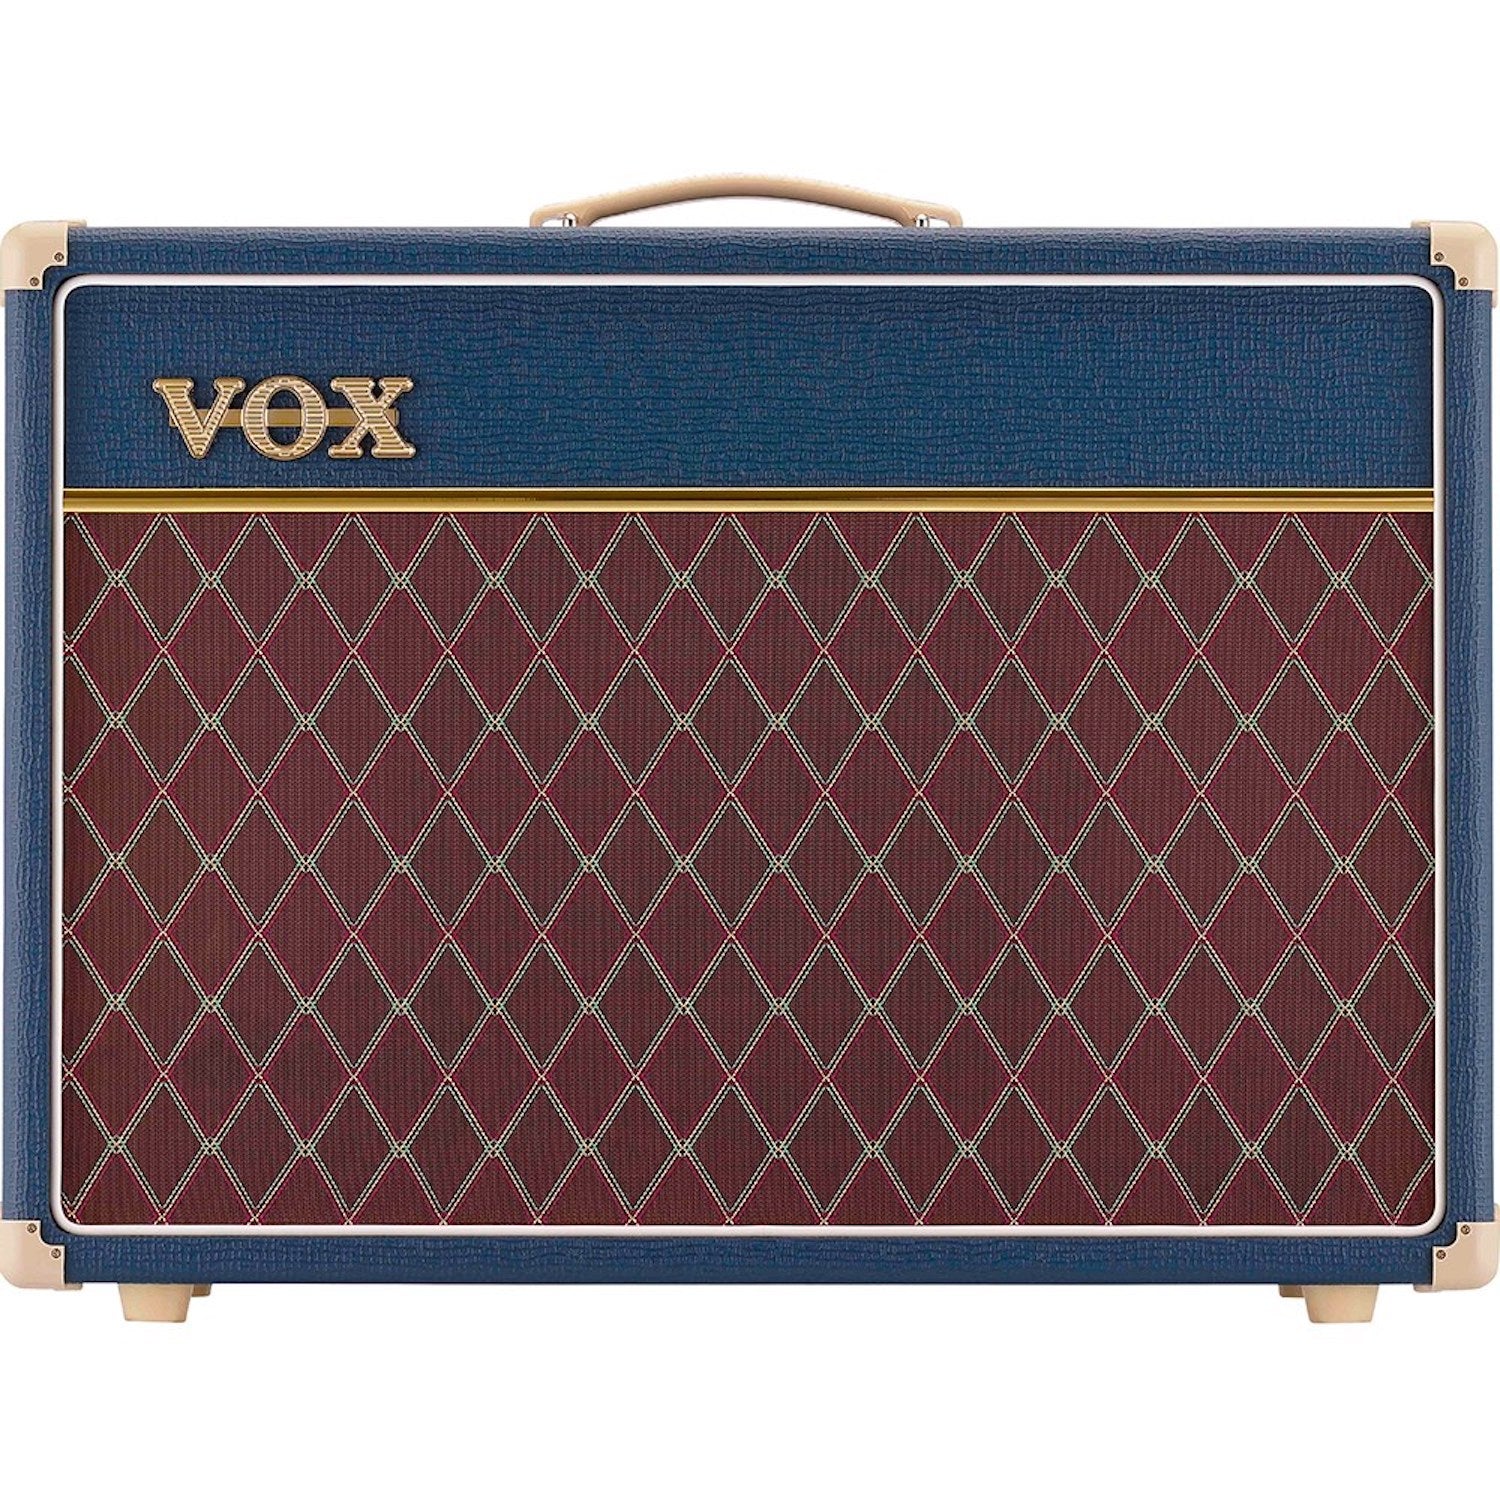 Vox AC15C1-RB Limited Edition 1x12" Guitar Amp Combo-Rich Blue